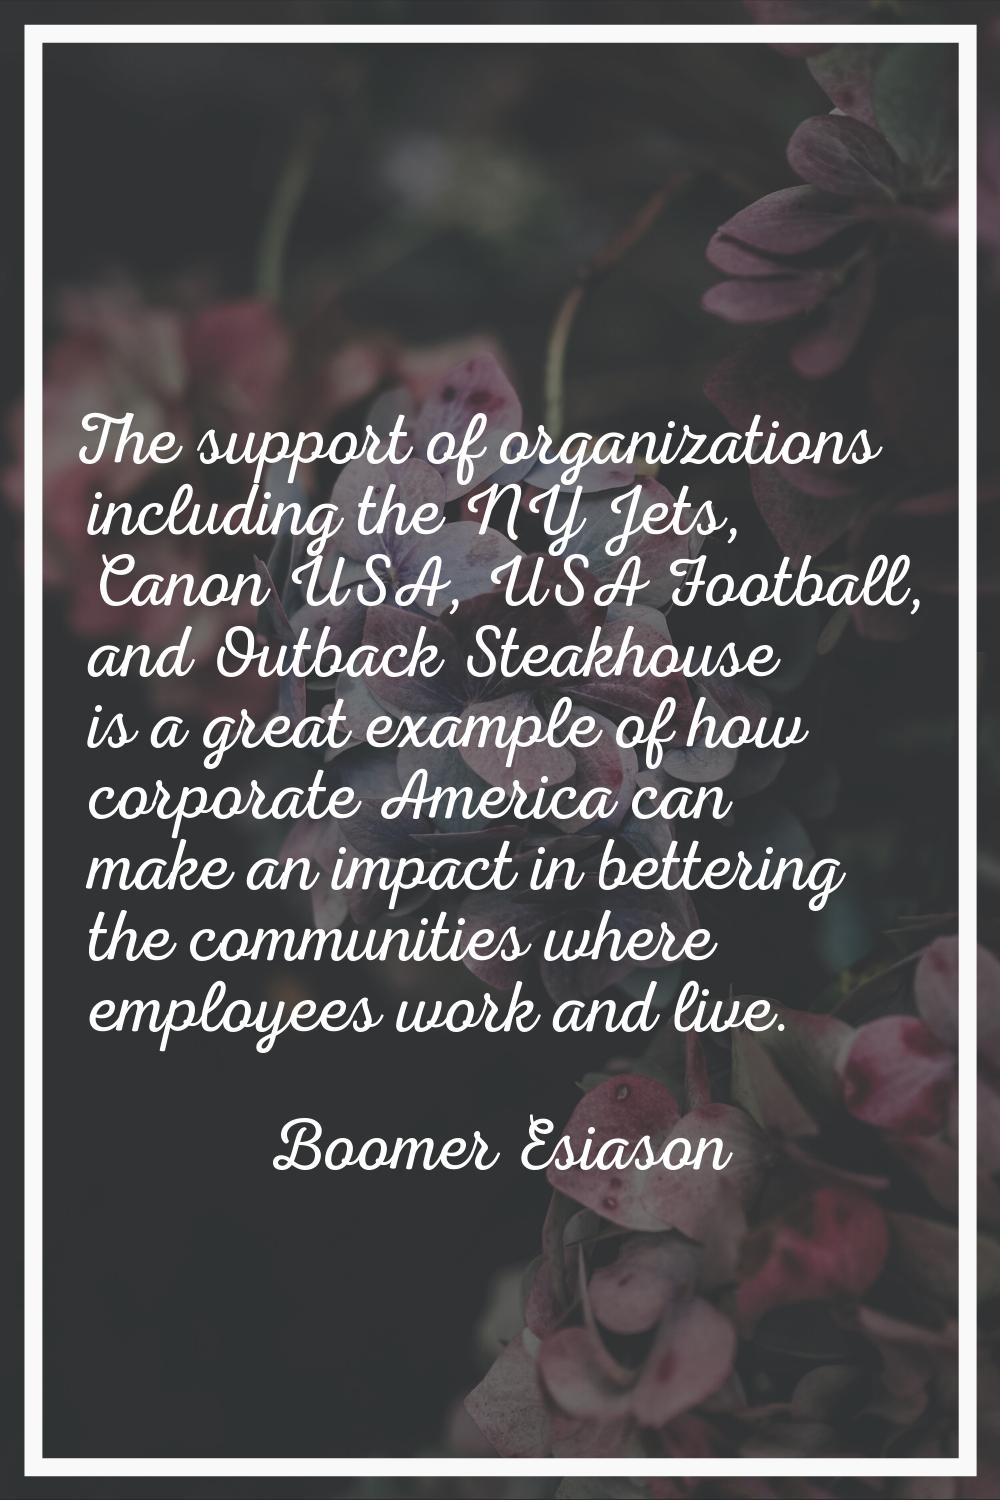 The support of organizations including the NY Jets, Canon USA, USA Football, and Outback Steakhouse